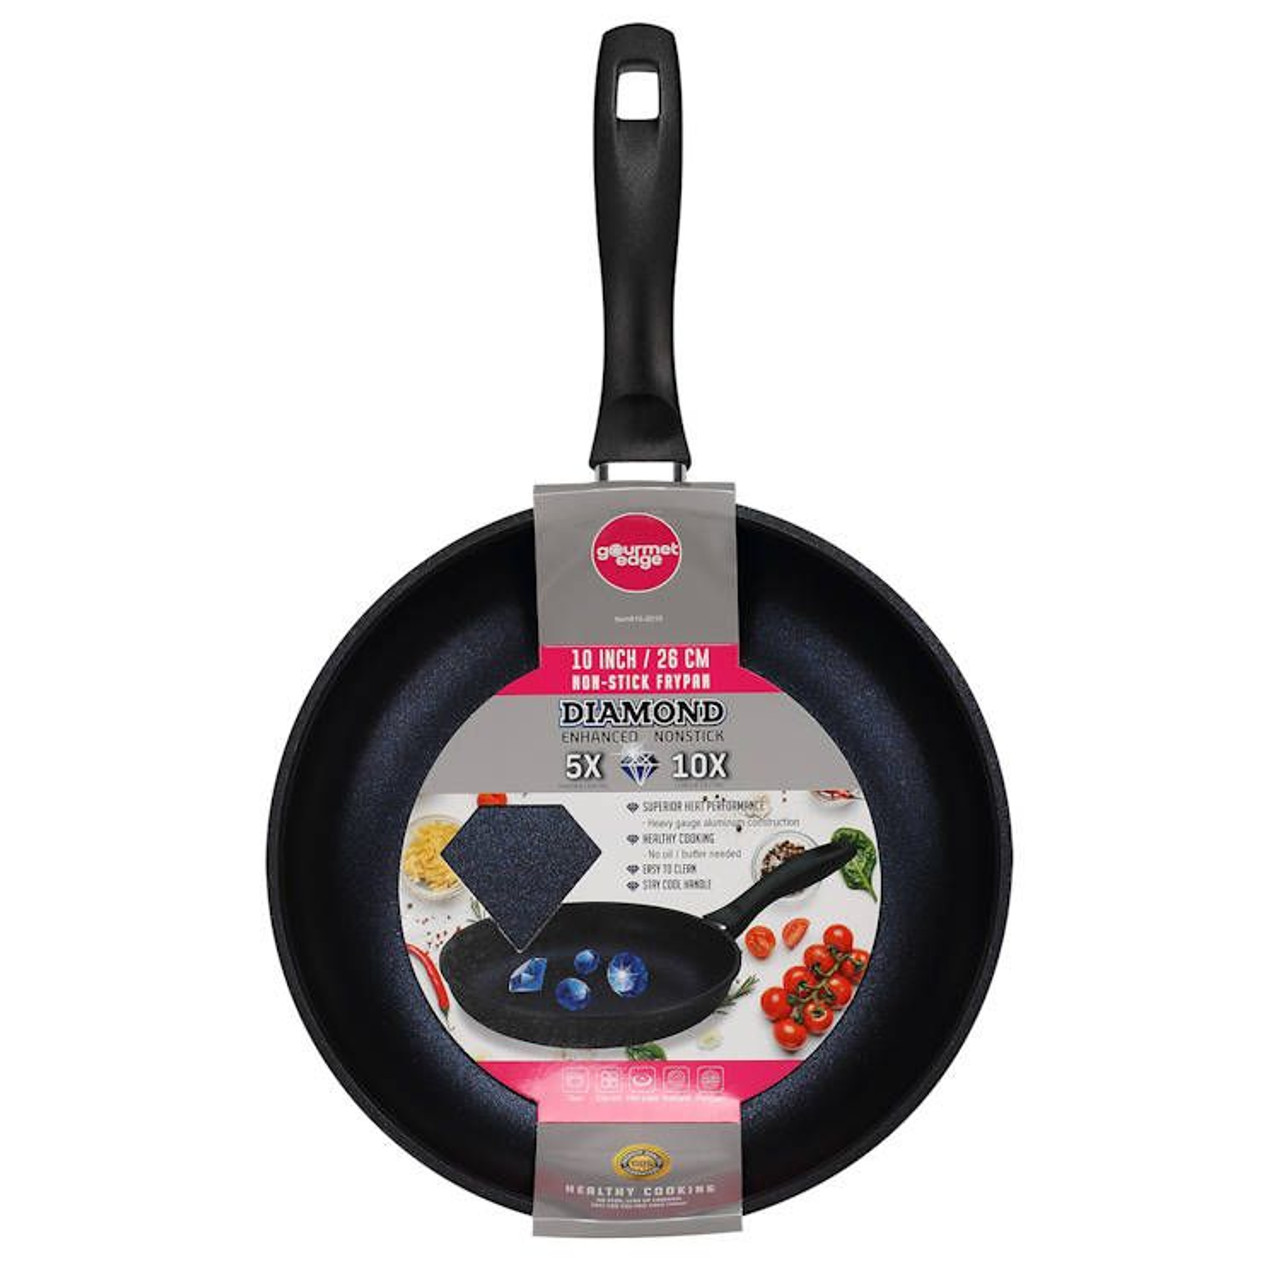 https://cdn11.bigcommerce.com/s-q0oajb576s/images/stencil/1280x1280/products/1345/3700/gourmet-edge-diamond-non-stick-aluminum-10-fry-pan-in-package-4__03355.1637184387.jpg?c=1?imbypass=on